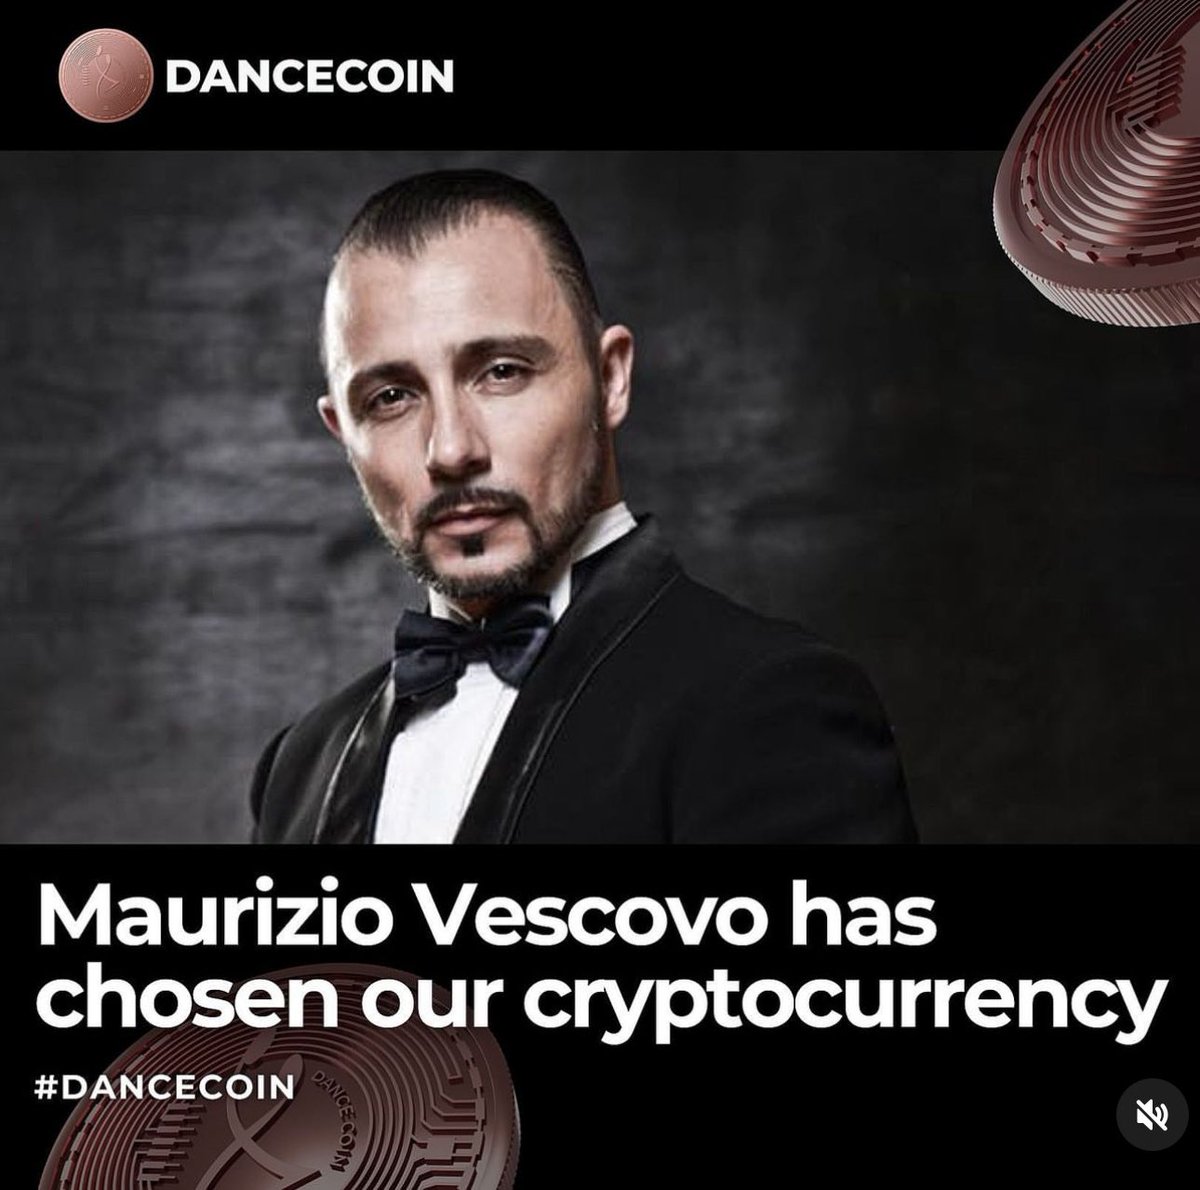 We are proud to announce that Maurizio Vescovo, an accomplished dancer has chosen our cryptocurrency, Dance Coin, to bring innovation to the world of dance. 😃✨ Join the Dance Coin revolution and discover how our cryptocurrency can change your dance world. 🔄💖